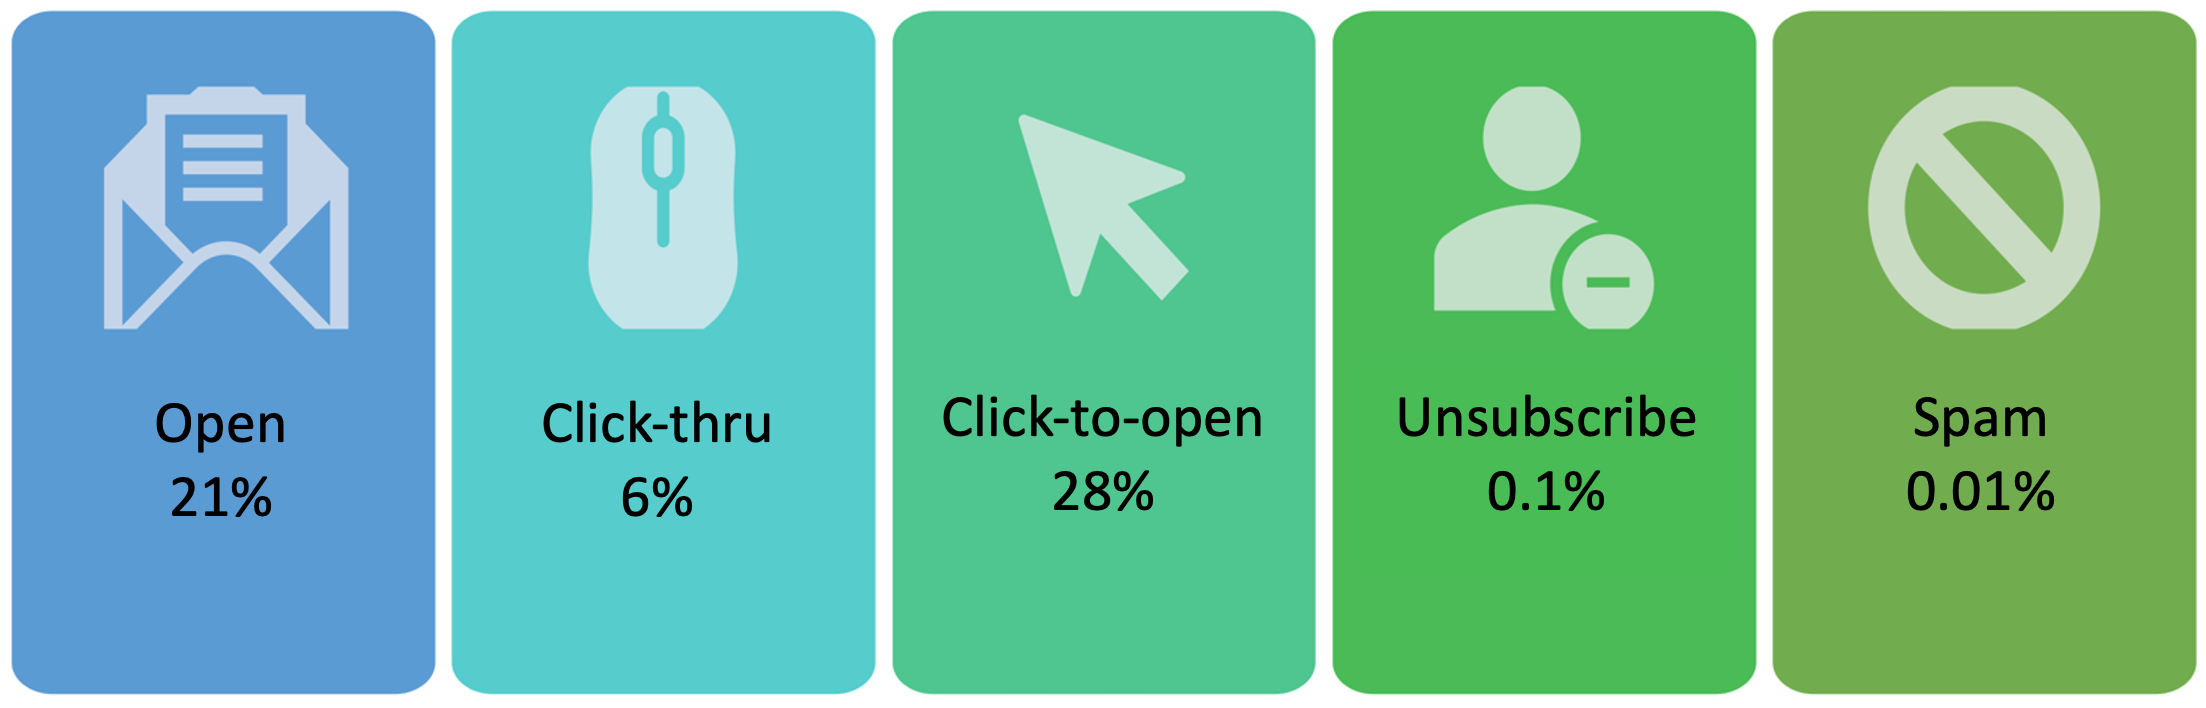 Average Email Statistics Canada: open 21%, click 6%, unsubscribe 0.1%, spam 0.01%